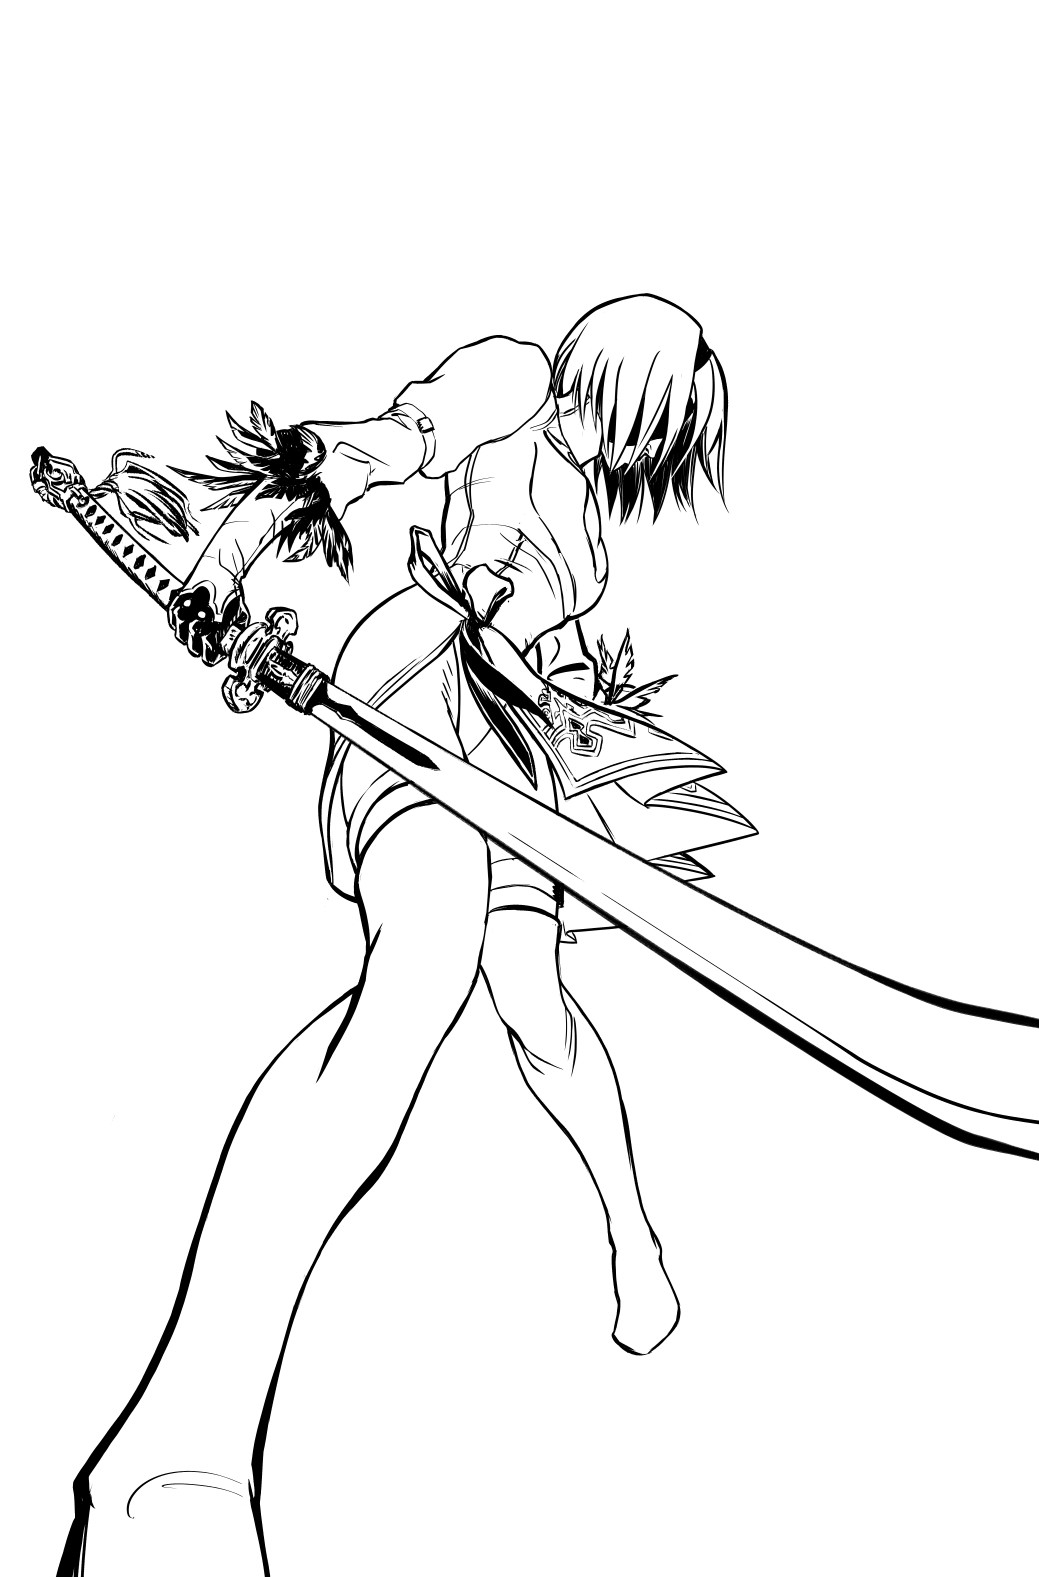 Lineart of the main character of the illustration